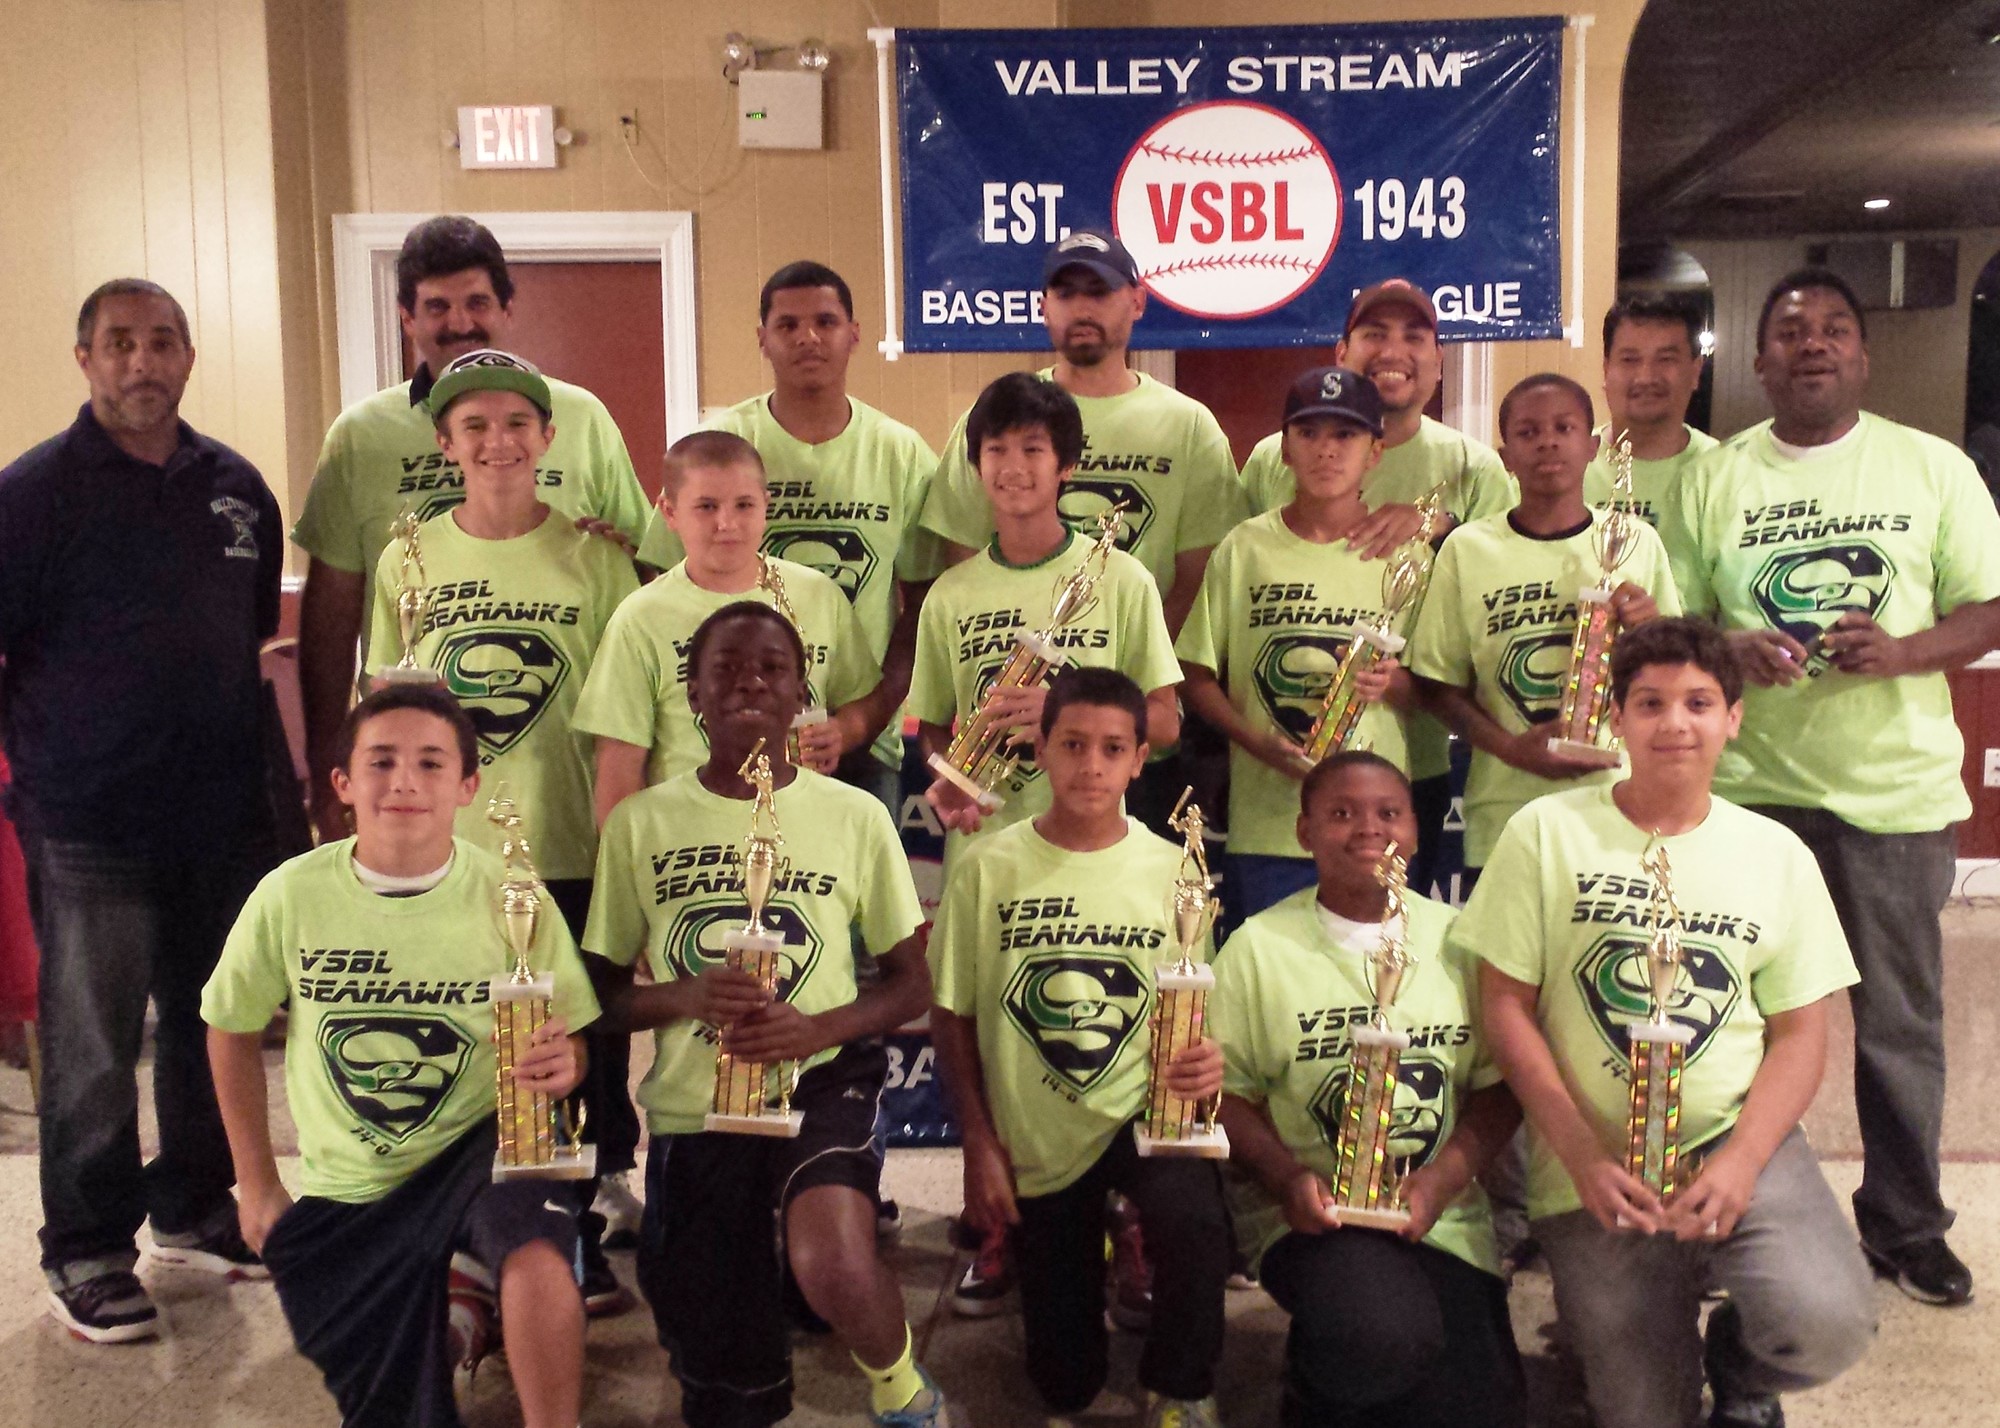 Valley Stream Baseball League President Bob Inzerillo, back row, second from left, dons a shirt celebrating the champions of the 12-and-under 'Derek Jeter' division, the Seahawks, coached by Nelson Martinez